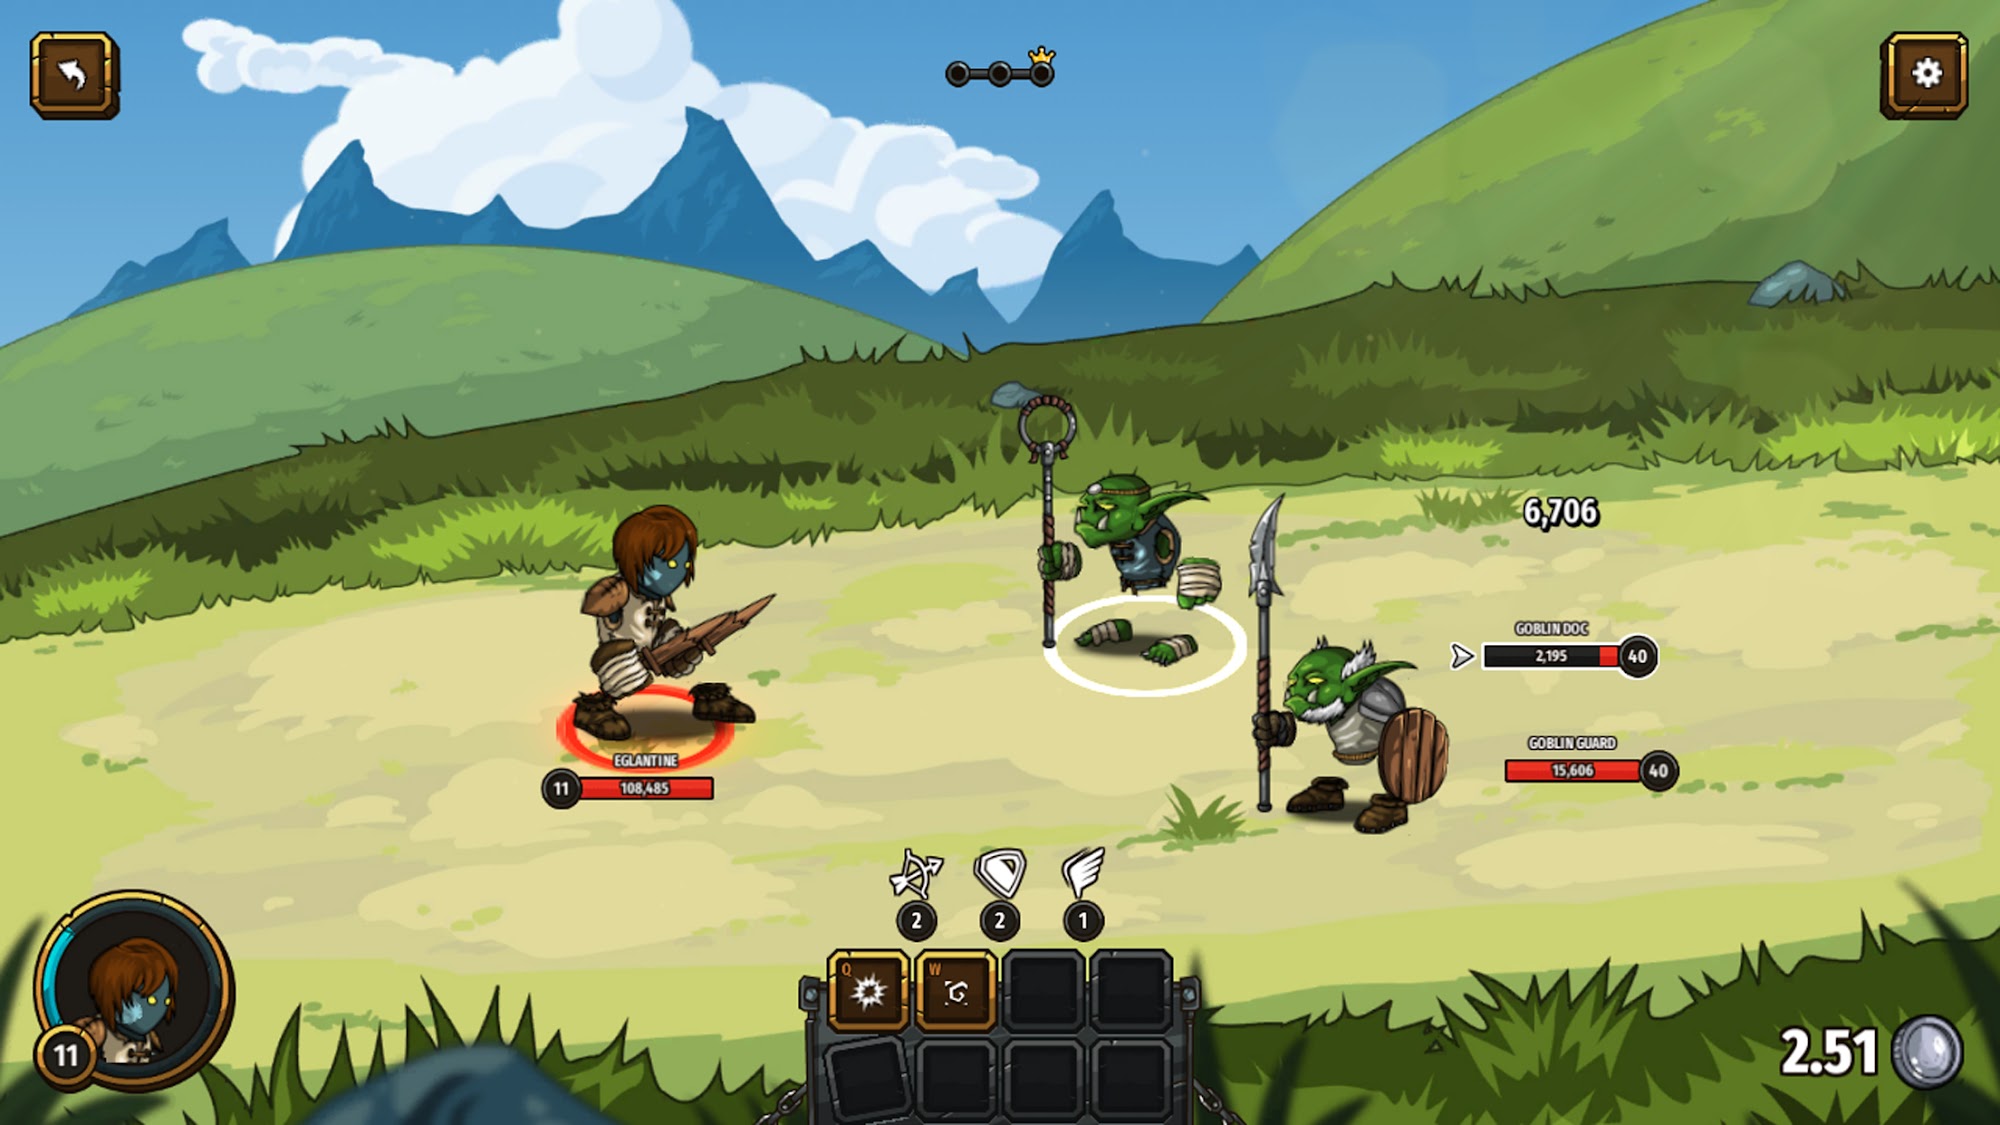 Gameplay of the Mighty Swords : Neverseen for Android phone or tablet.